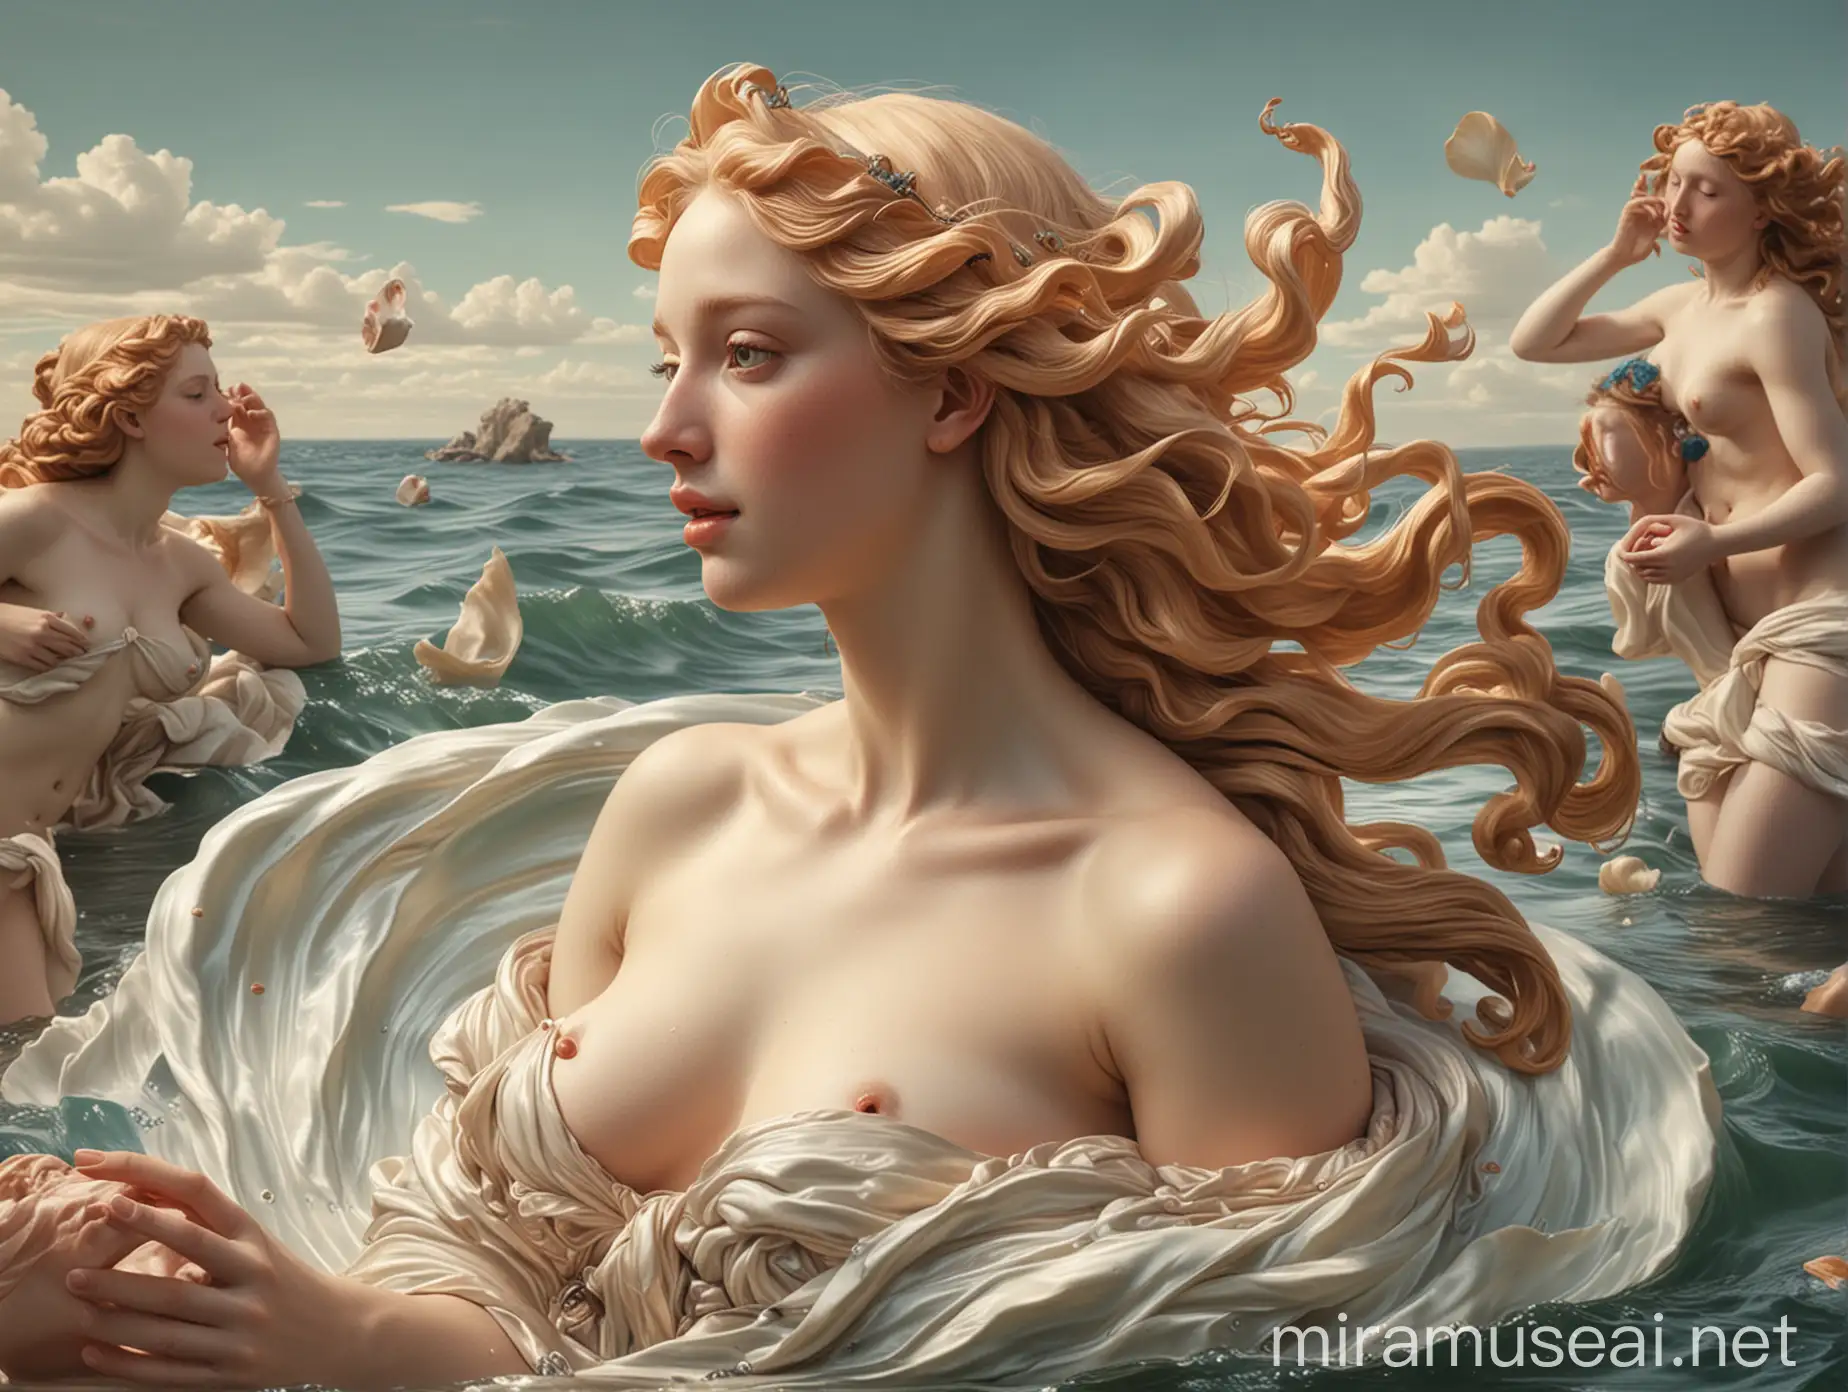 Hyperrealistic Depiction of The Birth of Venus